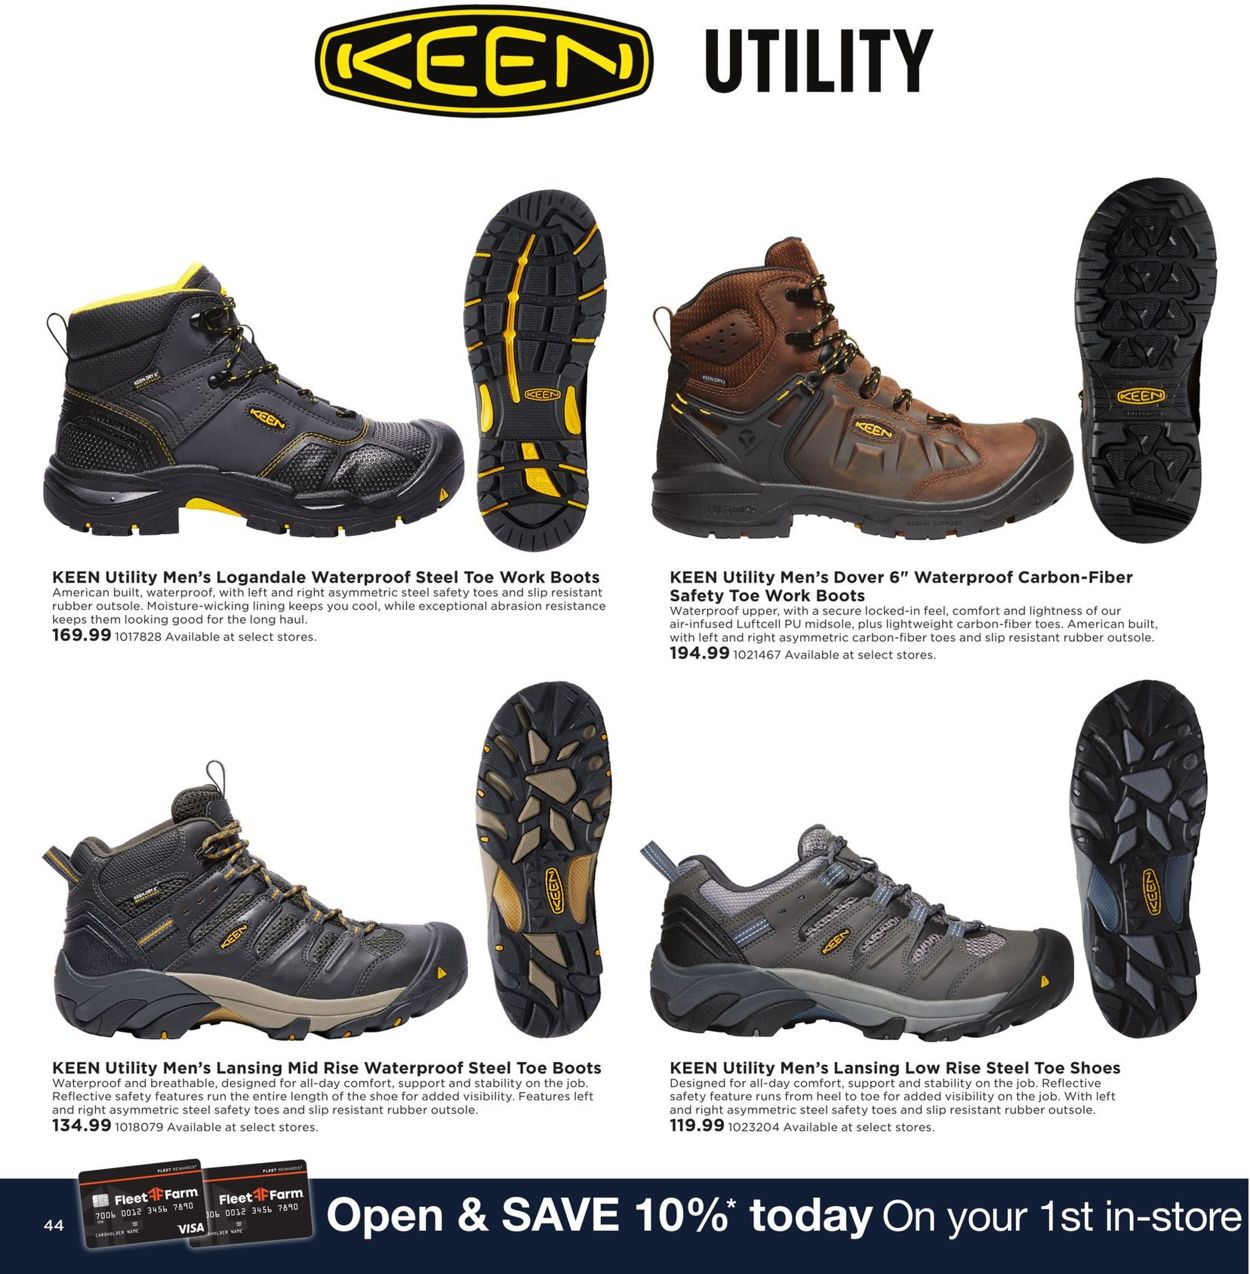 low rise steel toe boots